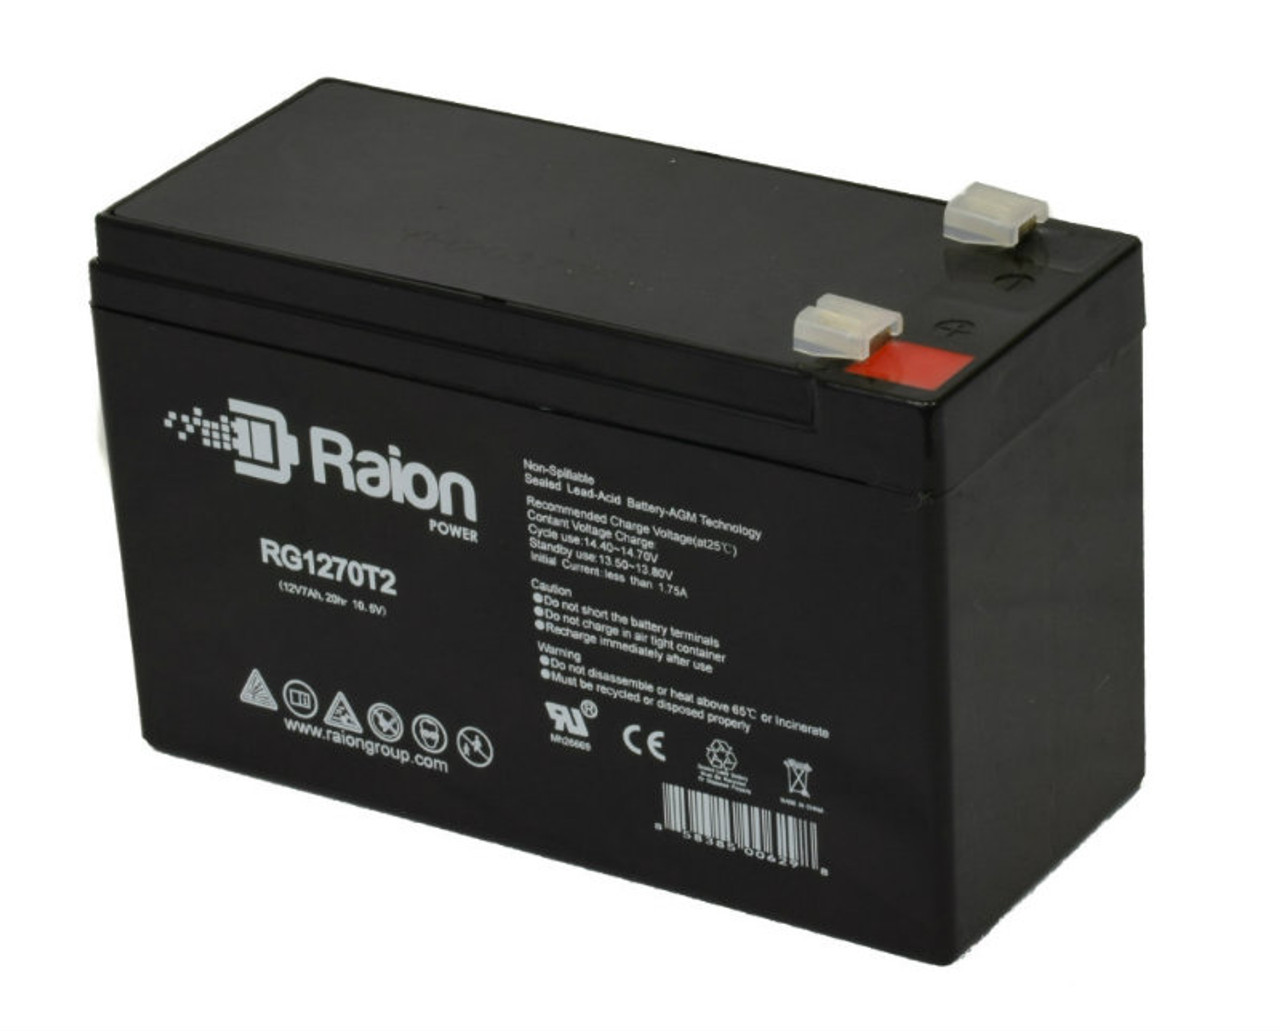 Raion Power Replacement 12V 7Ah Battery for Cybex 770AT Arc Trainer Fitness Equipment